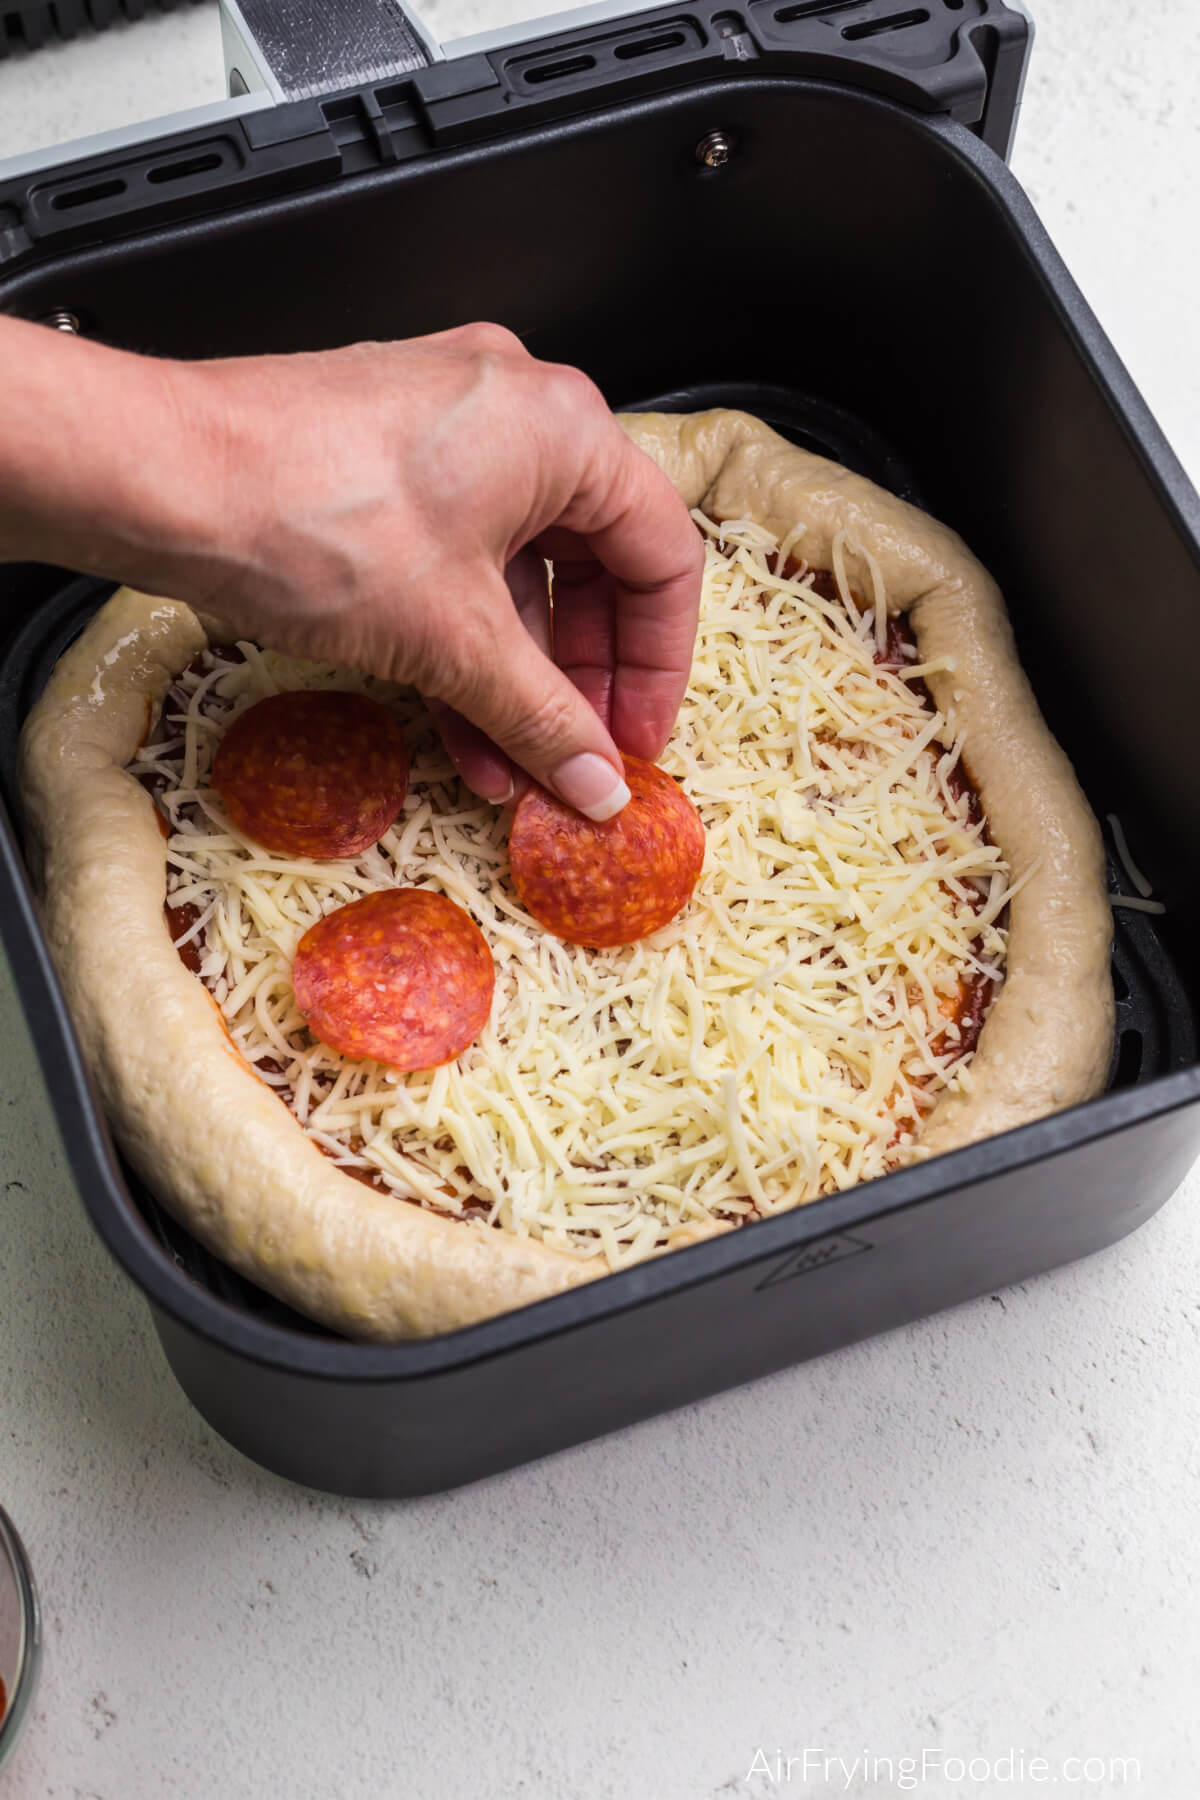 Pepperoni being placed onto a pizza in air fryer basket.